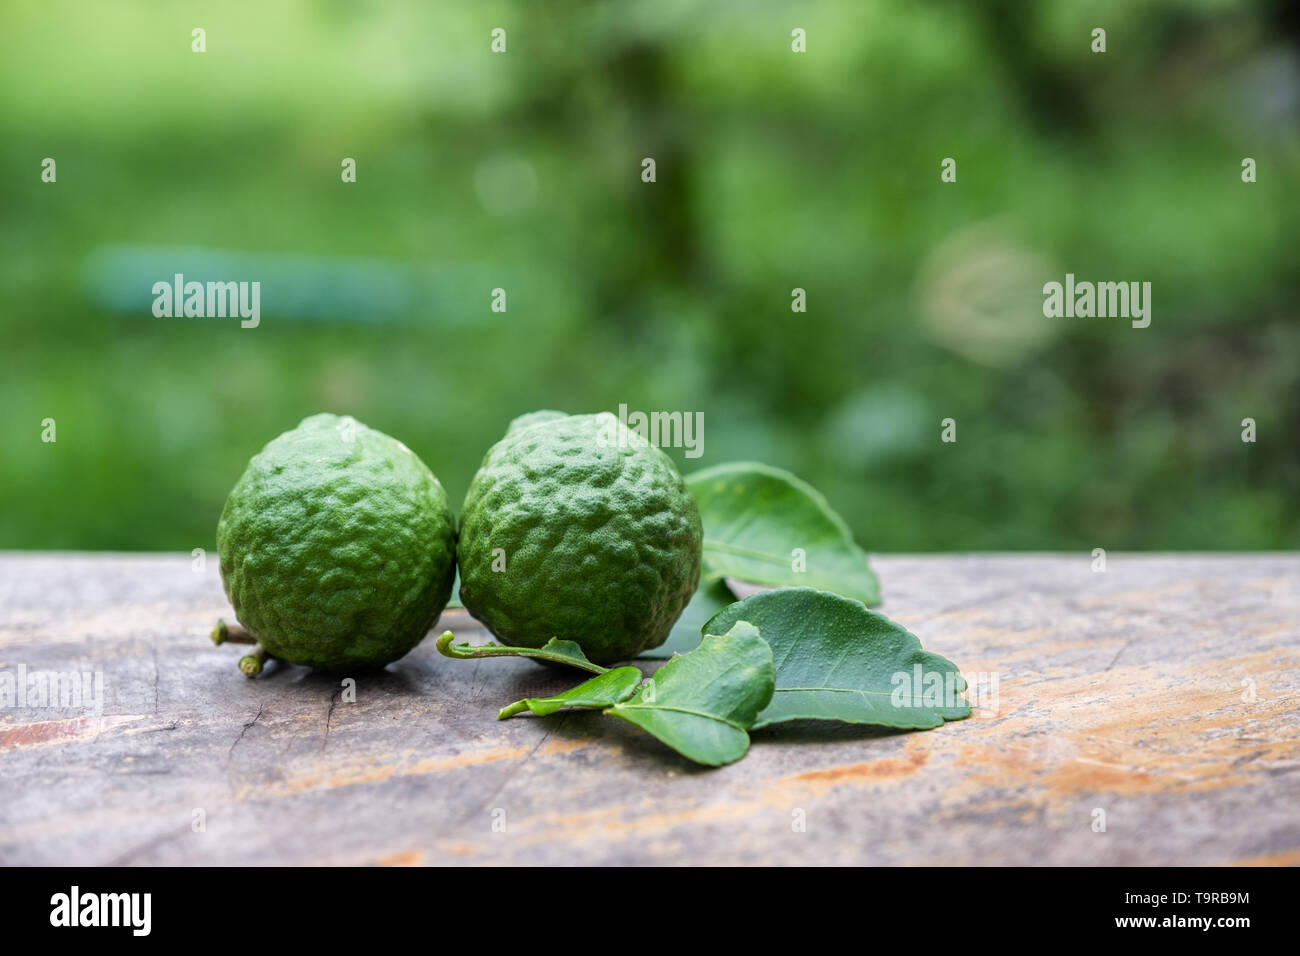 Bergamot fruit with leaf from garden on wooden table Stock Photo